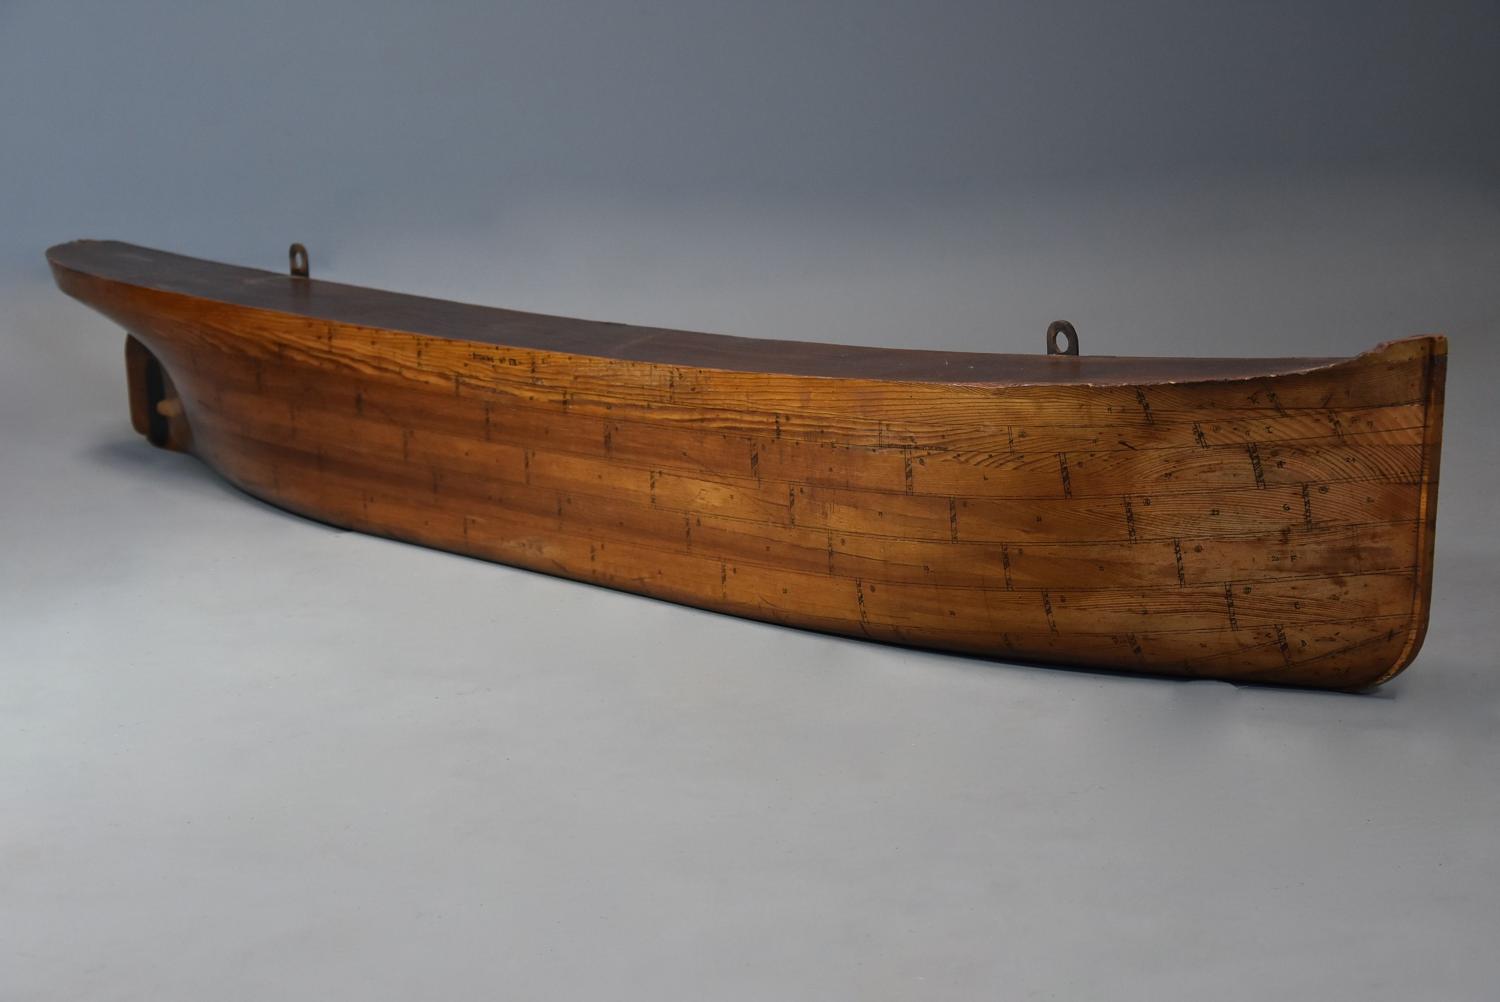 Large 19thc pine shipwright's half hull model of a steamboat